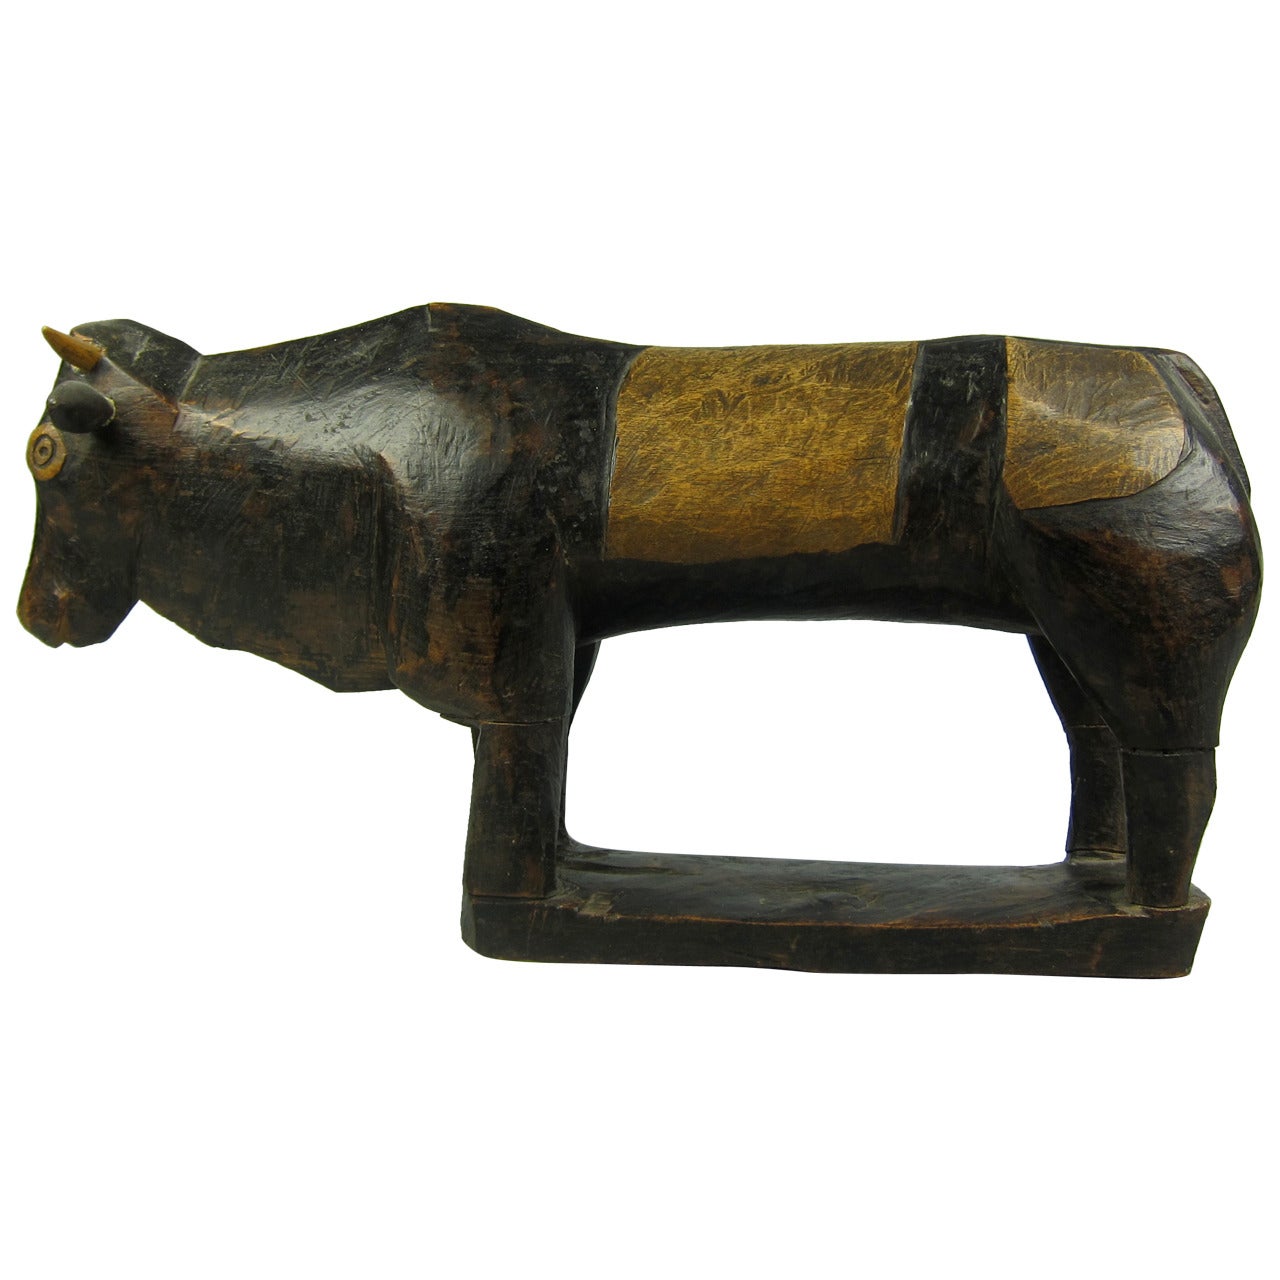 Early 20th Century Zulu Carving of a Bull, South Africa